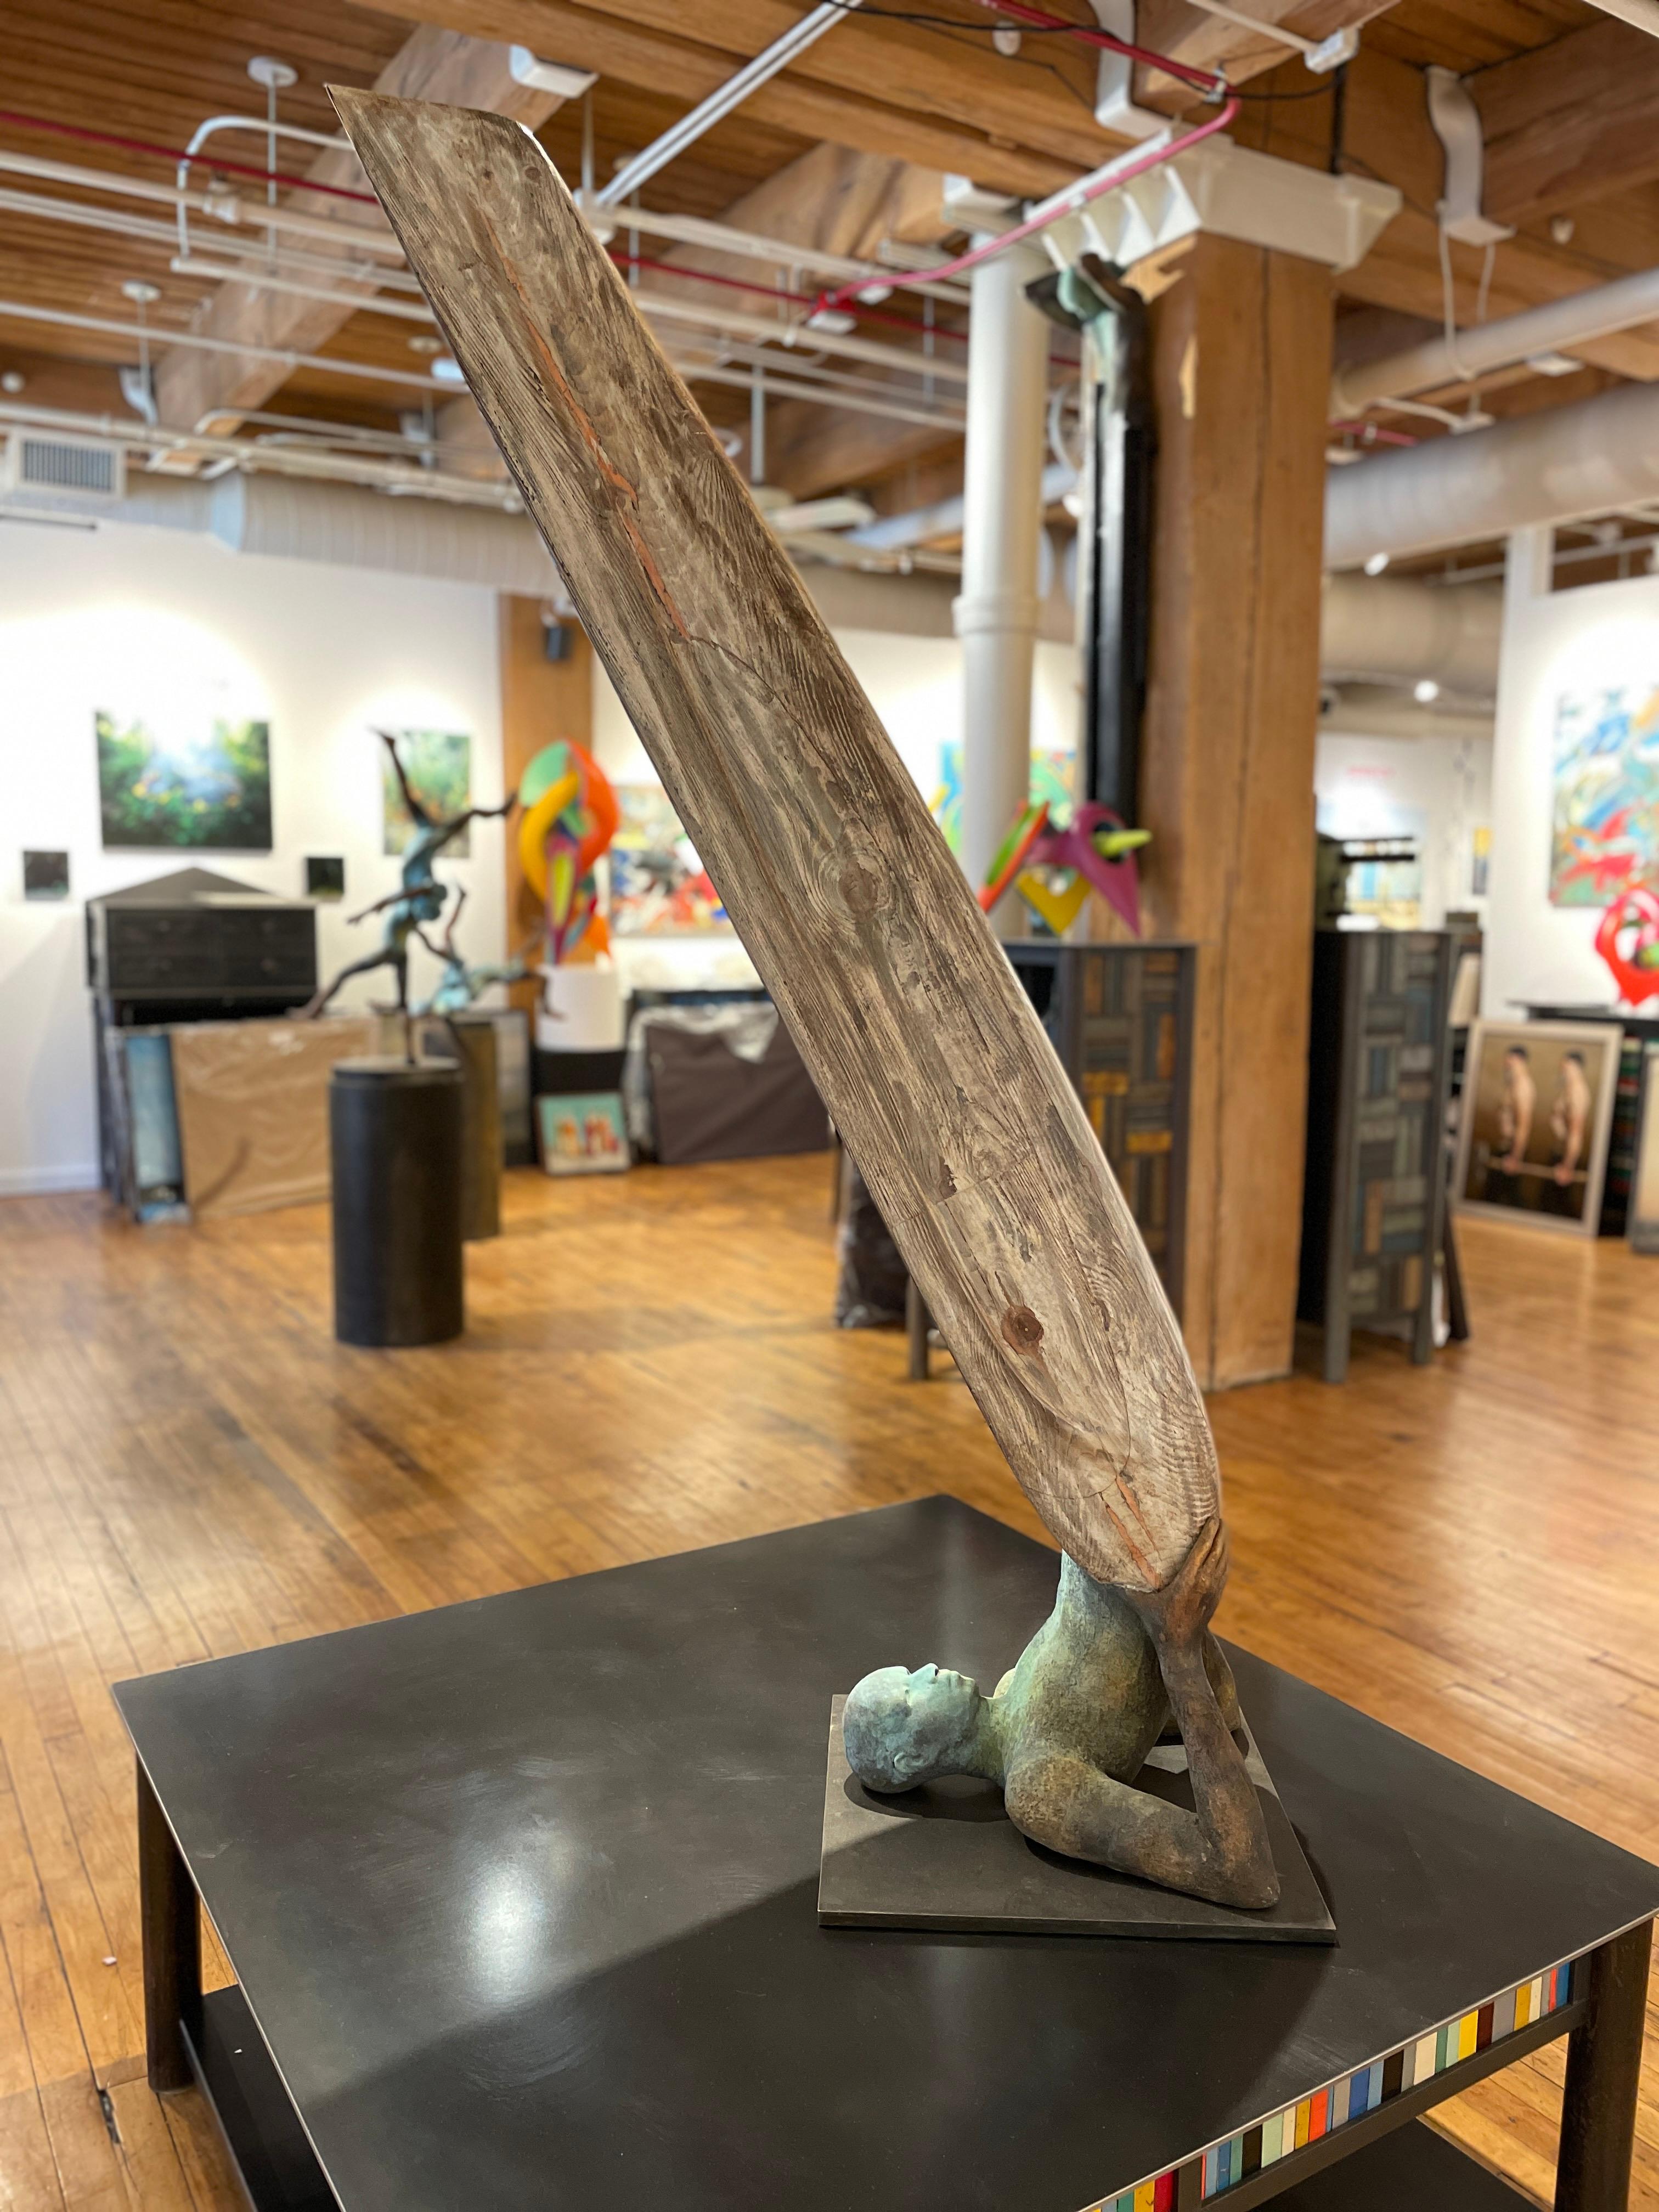 Inspired by the Shoulder Stand in Yoga, aka Sarvangasan, Curiá brings an abstraction to the pose as the figure's legs morph into a wooden boat.  The figure has a beautiful green patina that flows into a warm copper rust at its extremities, adding to